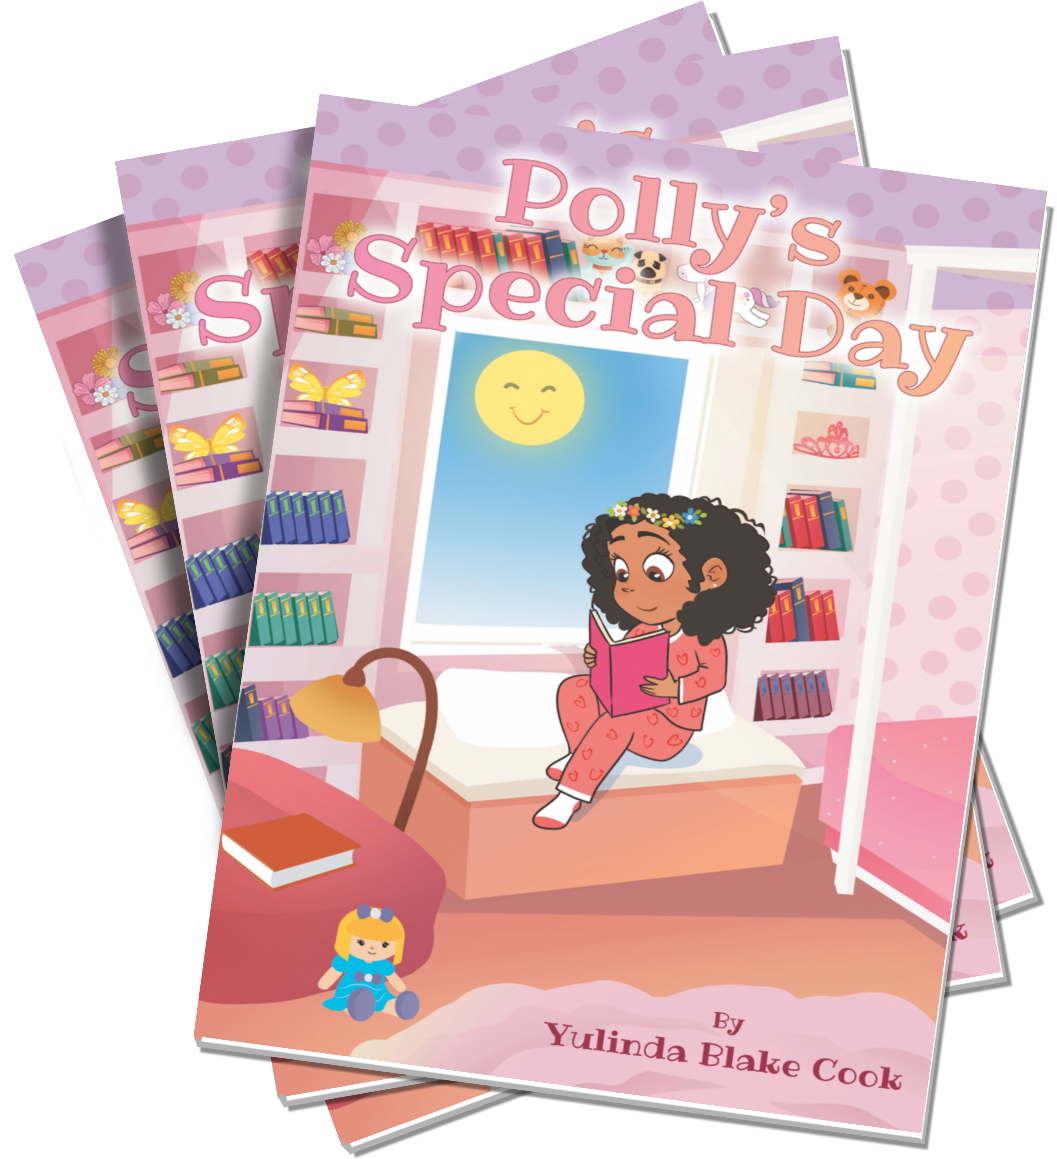 Polly's Special Day
by Yulinda Blake Cook.